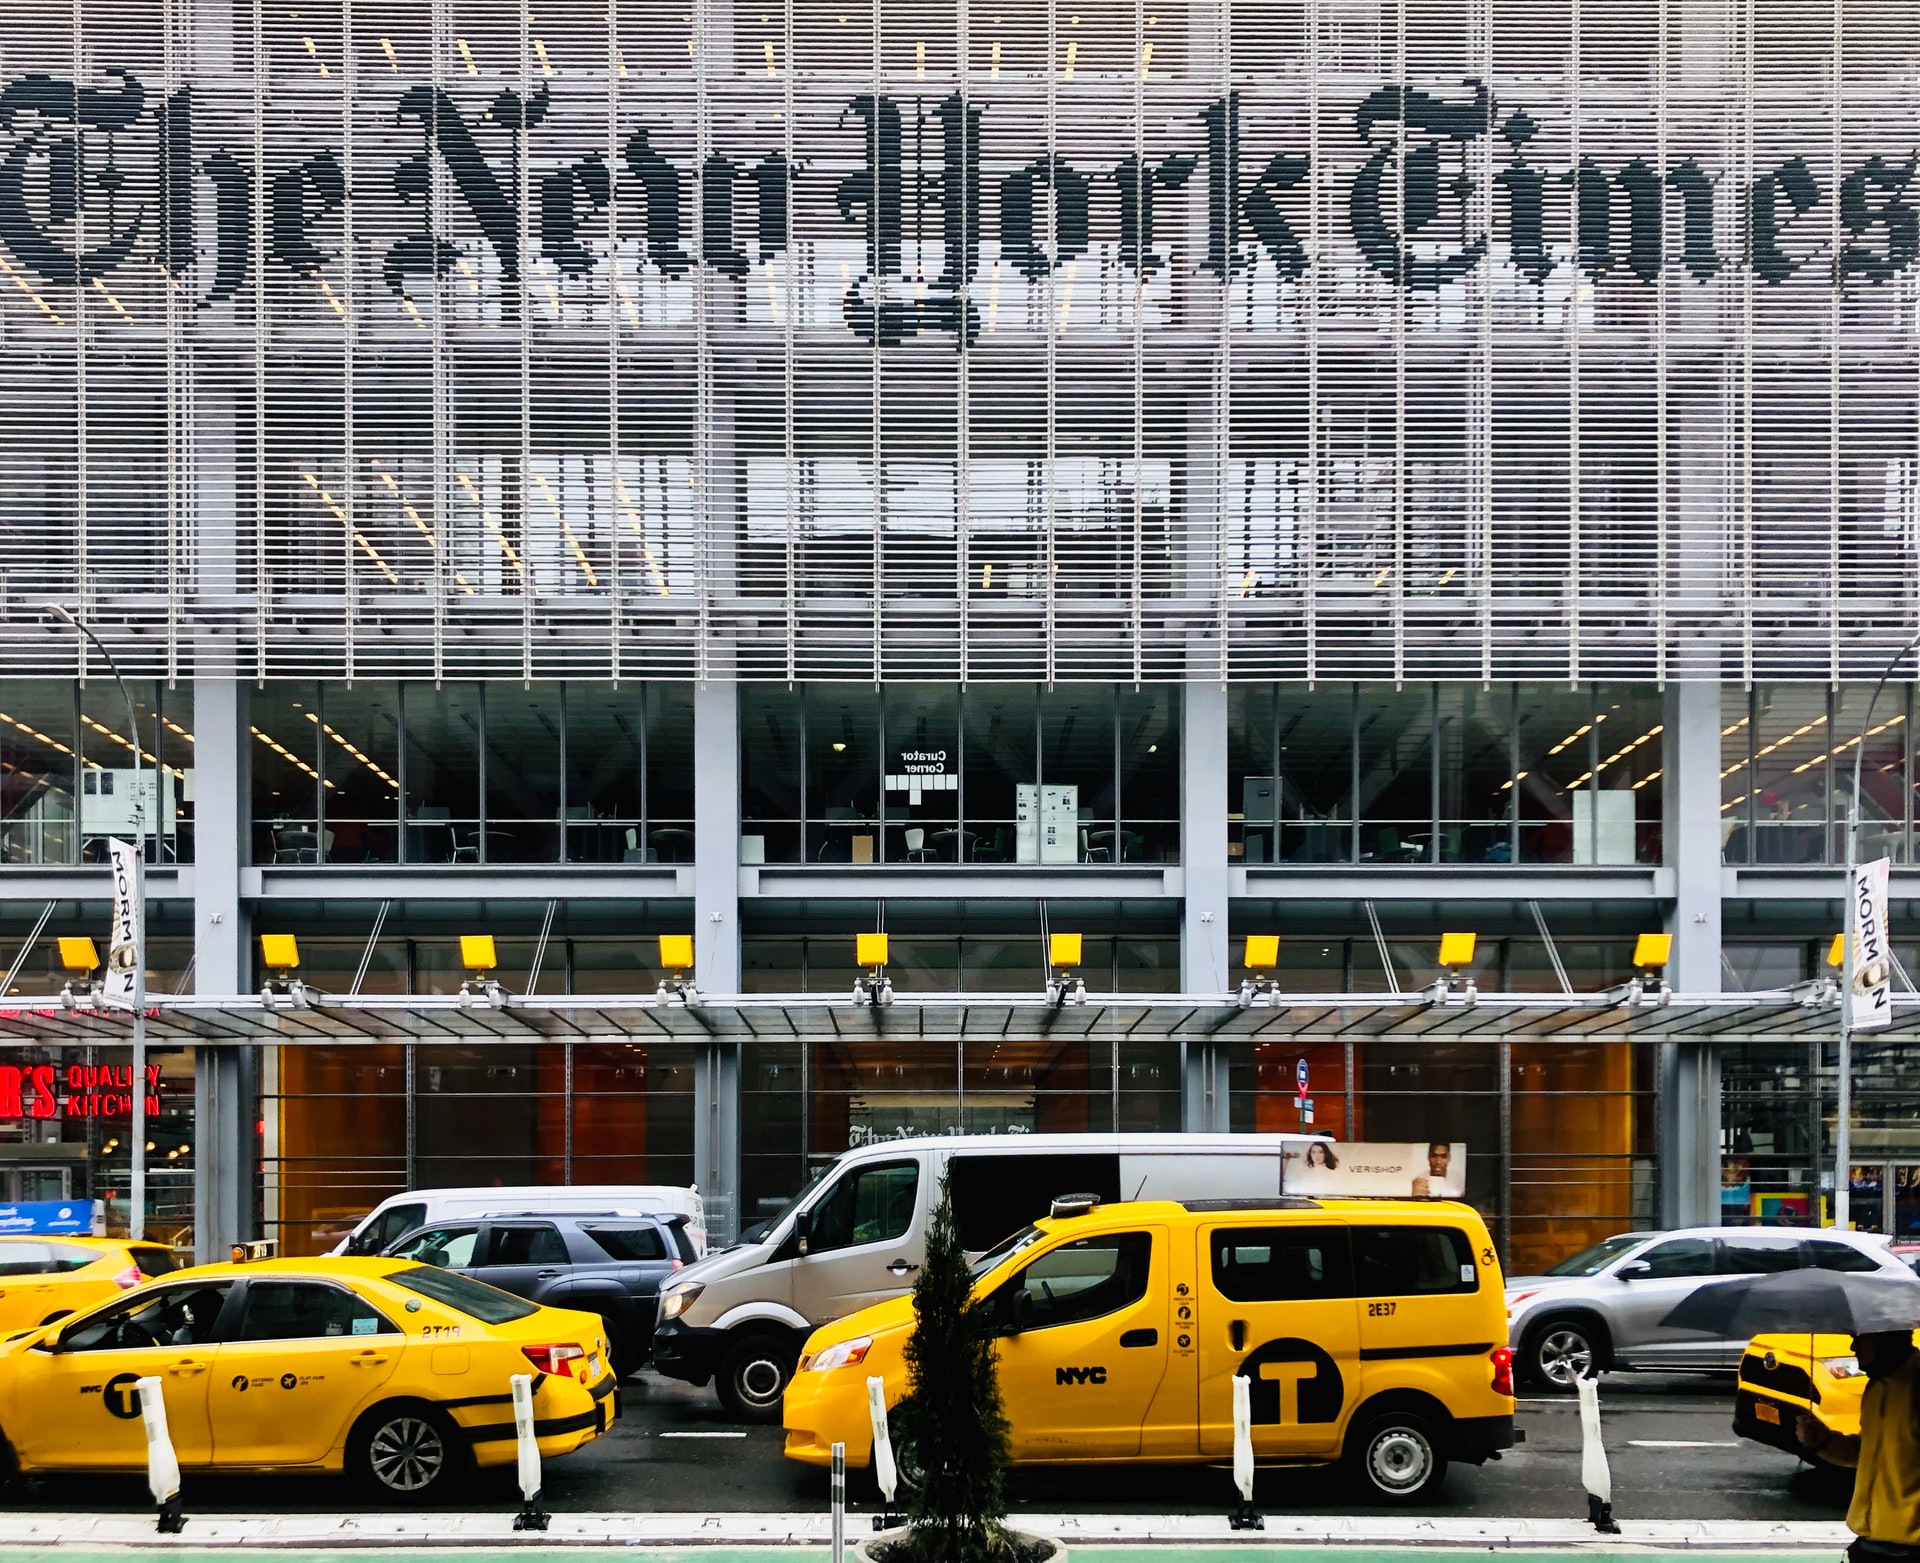 A view of facade of the New York Times Company, a grey metal and glass wall, with taxis and cars in front.